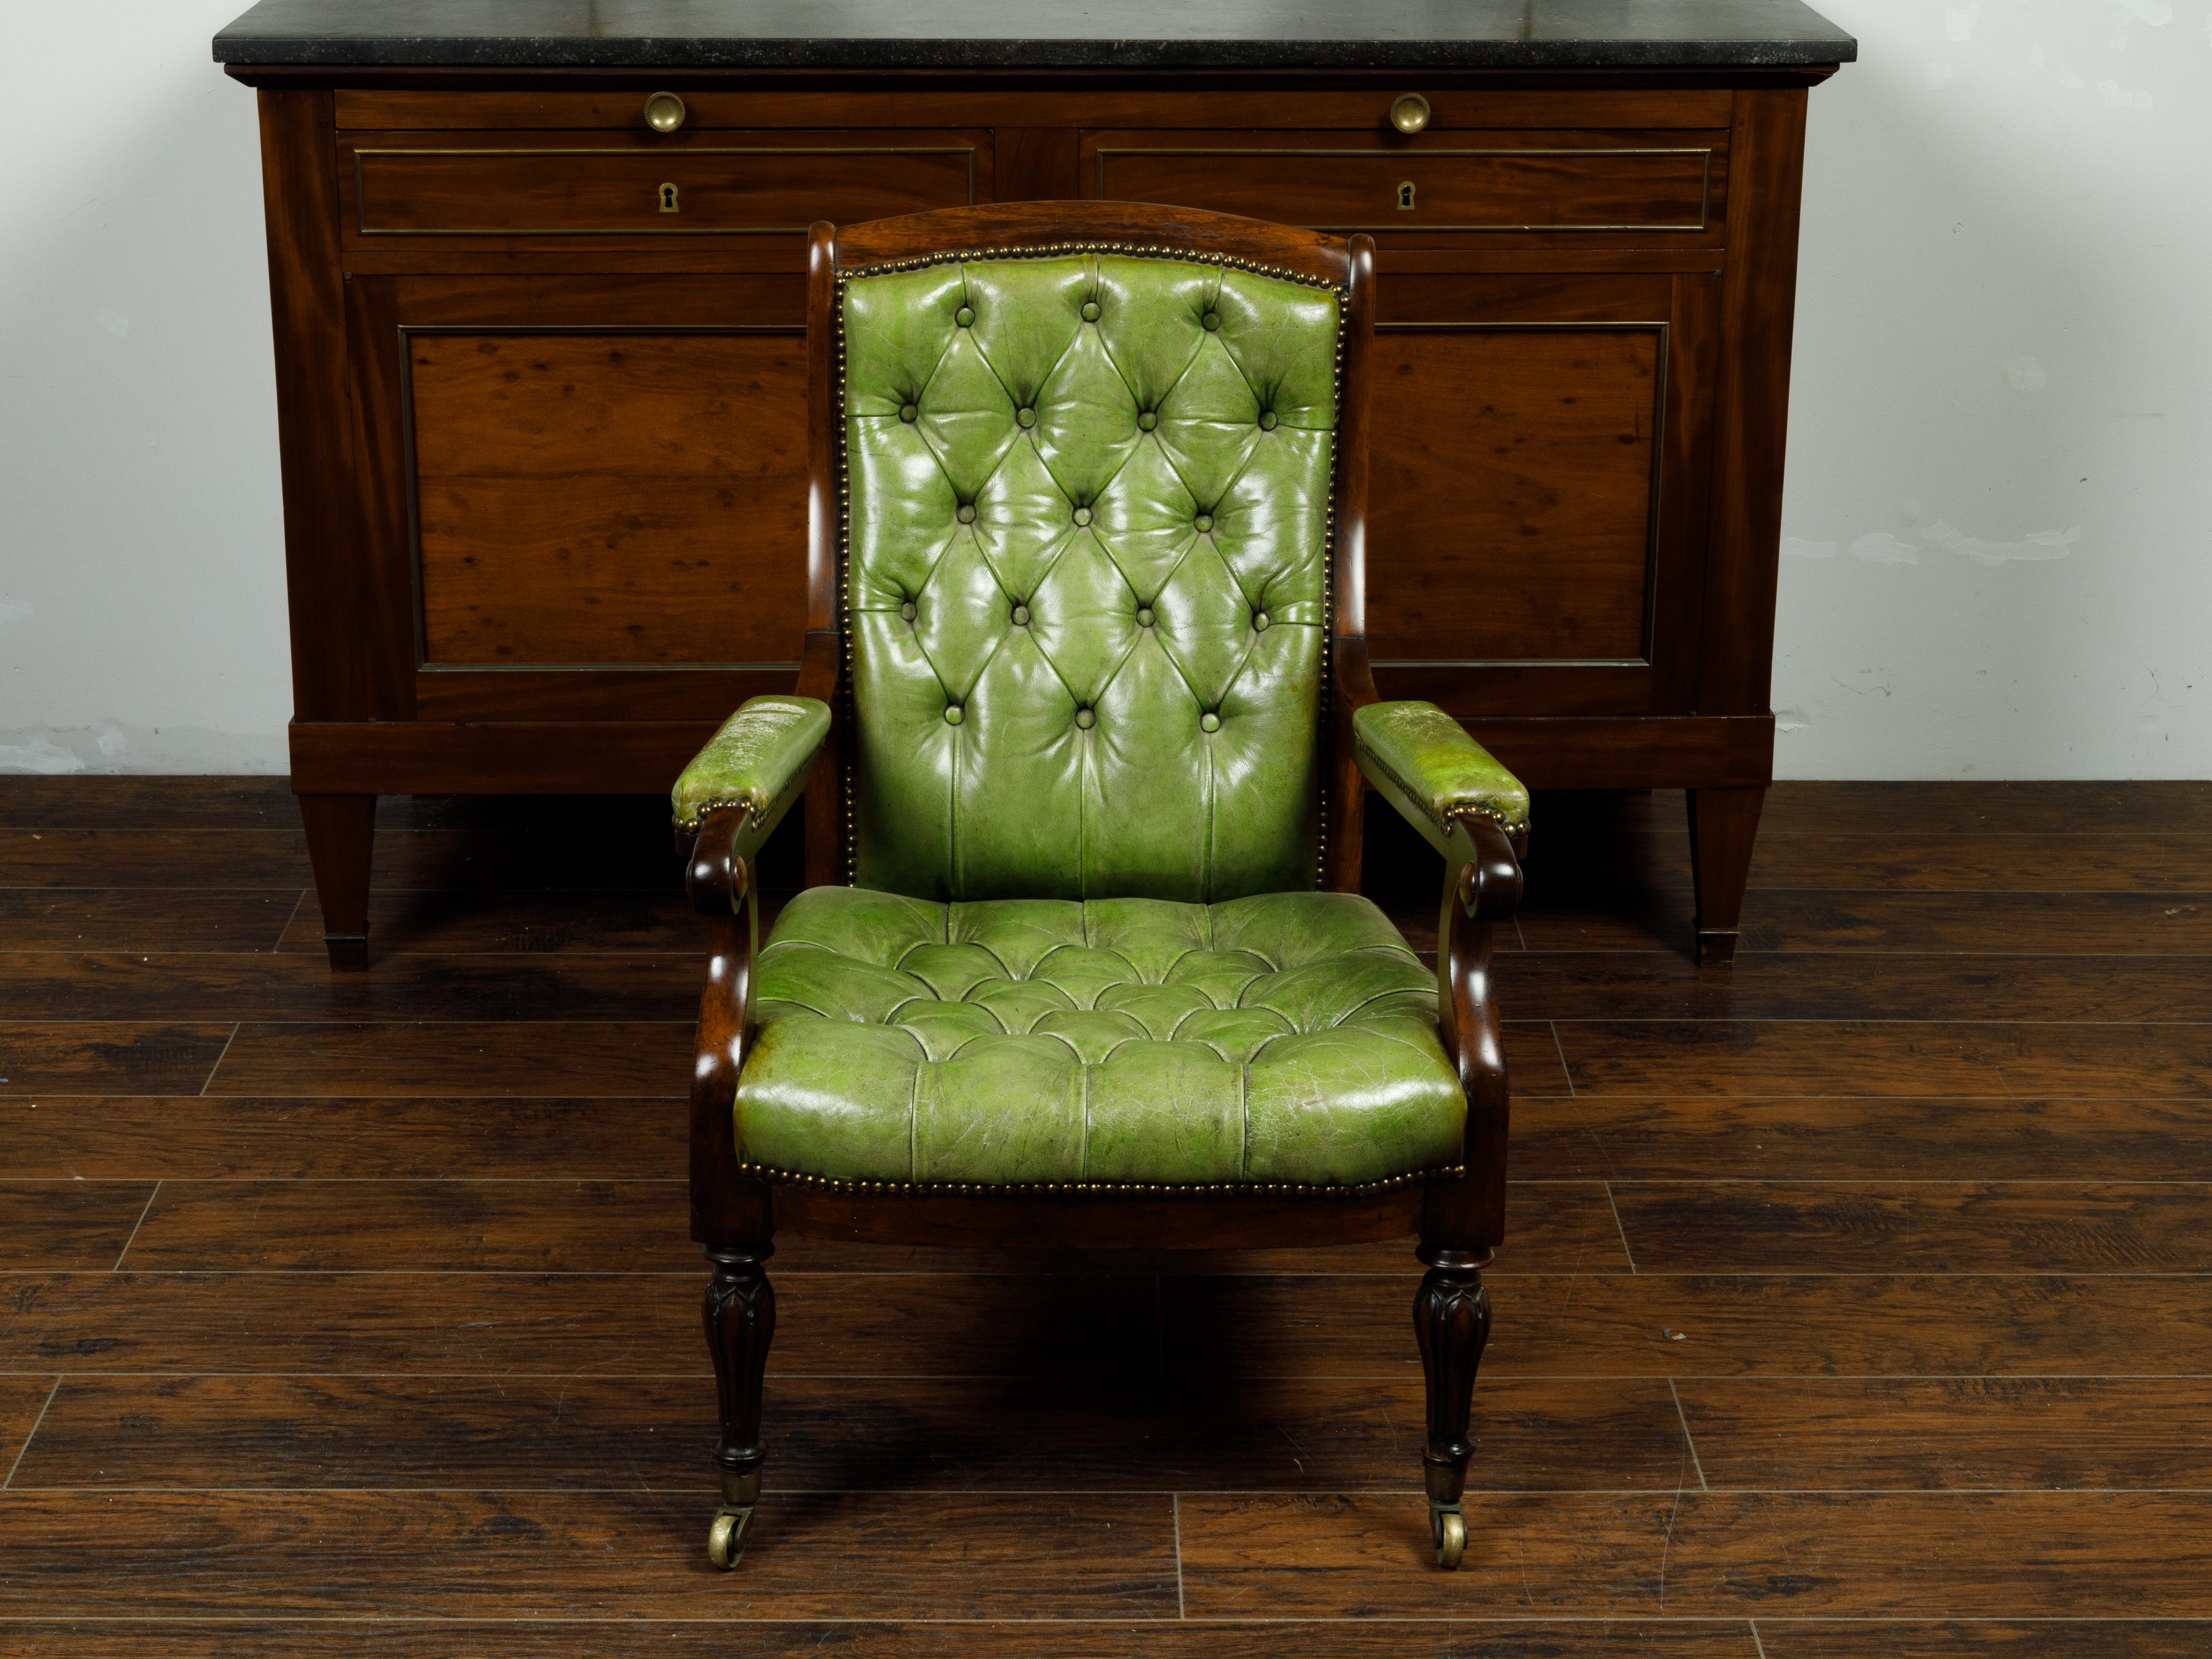 An English Regency green tufted leather club chair from the 19th century, with scrolling arms and casters. Created in England during the second quarter of the 19th century, this Regency club chair features a splendid green tufted leather back and